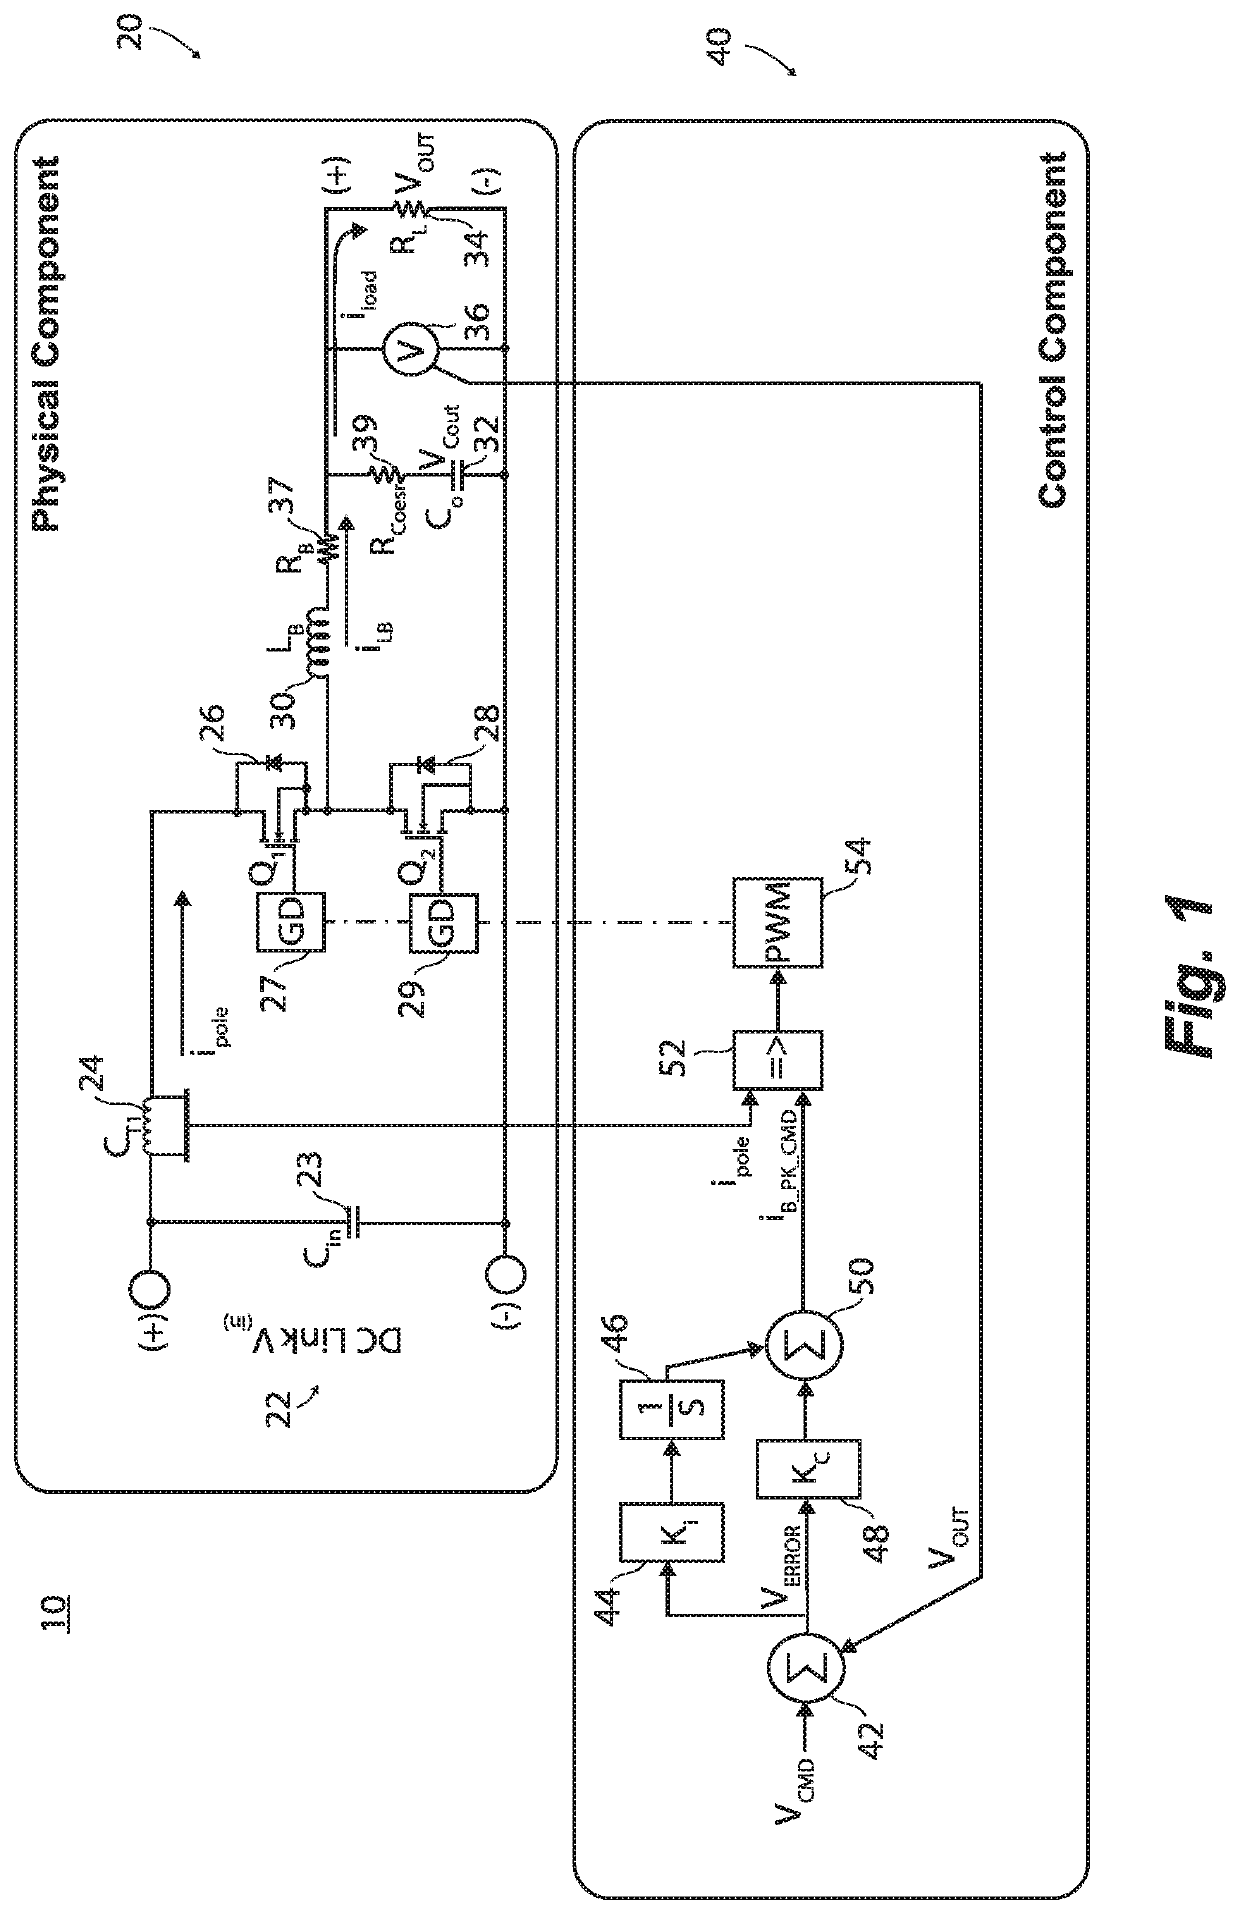 Controller for buck DC/DC converter with effective decoupling